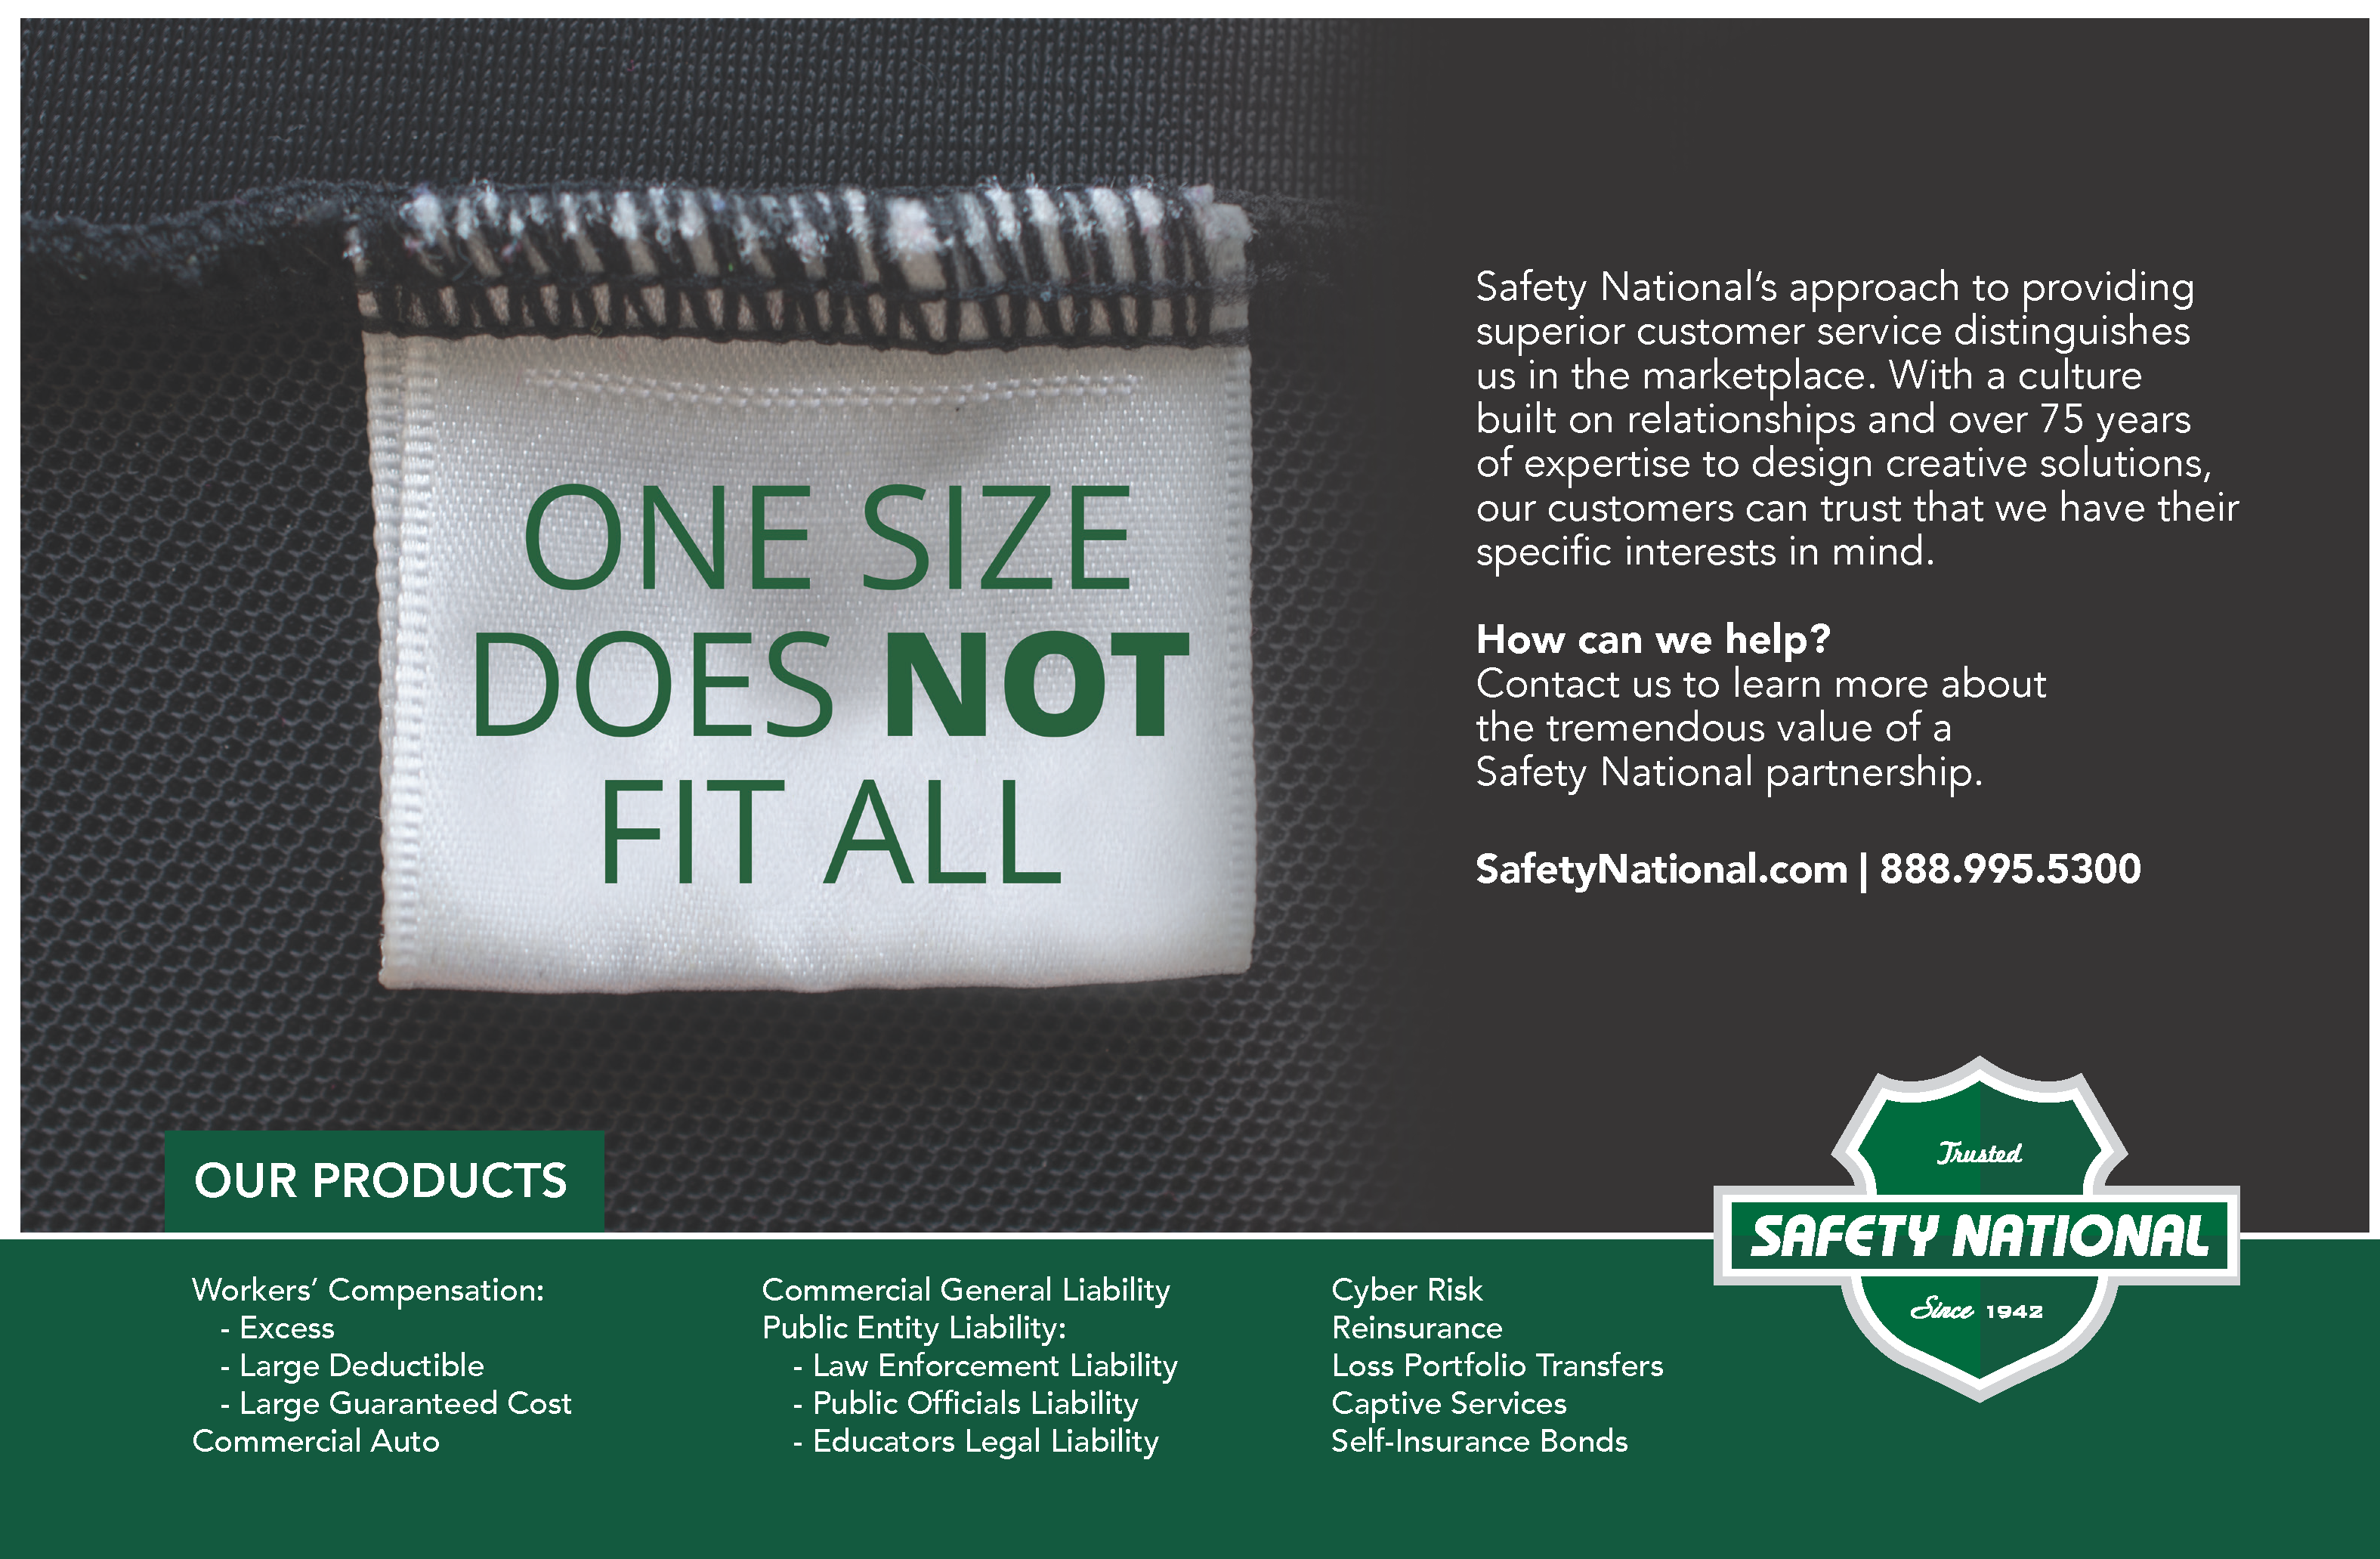 One Size Does Not Fit All - Safety National Advertisement 2018